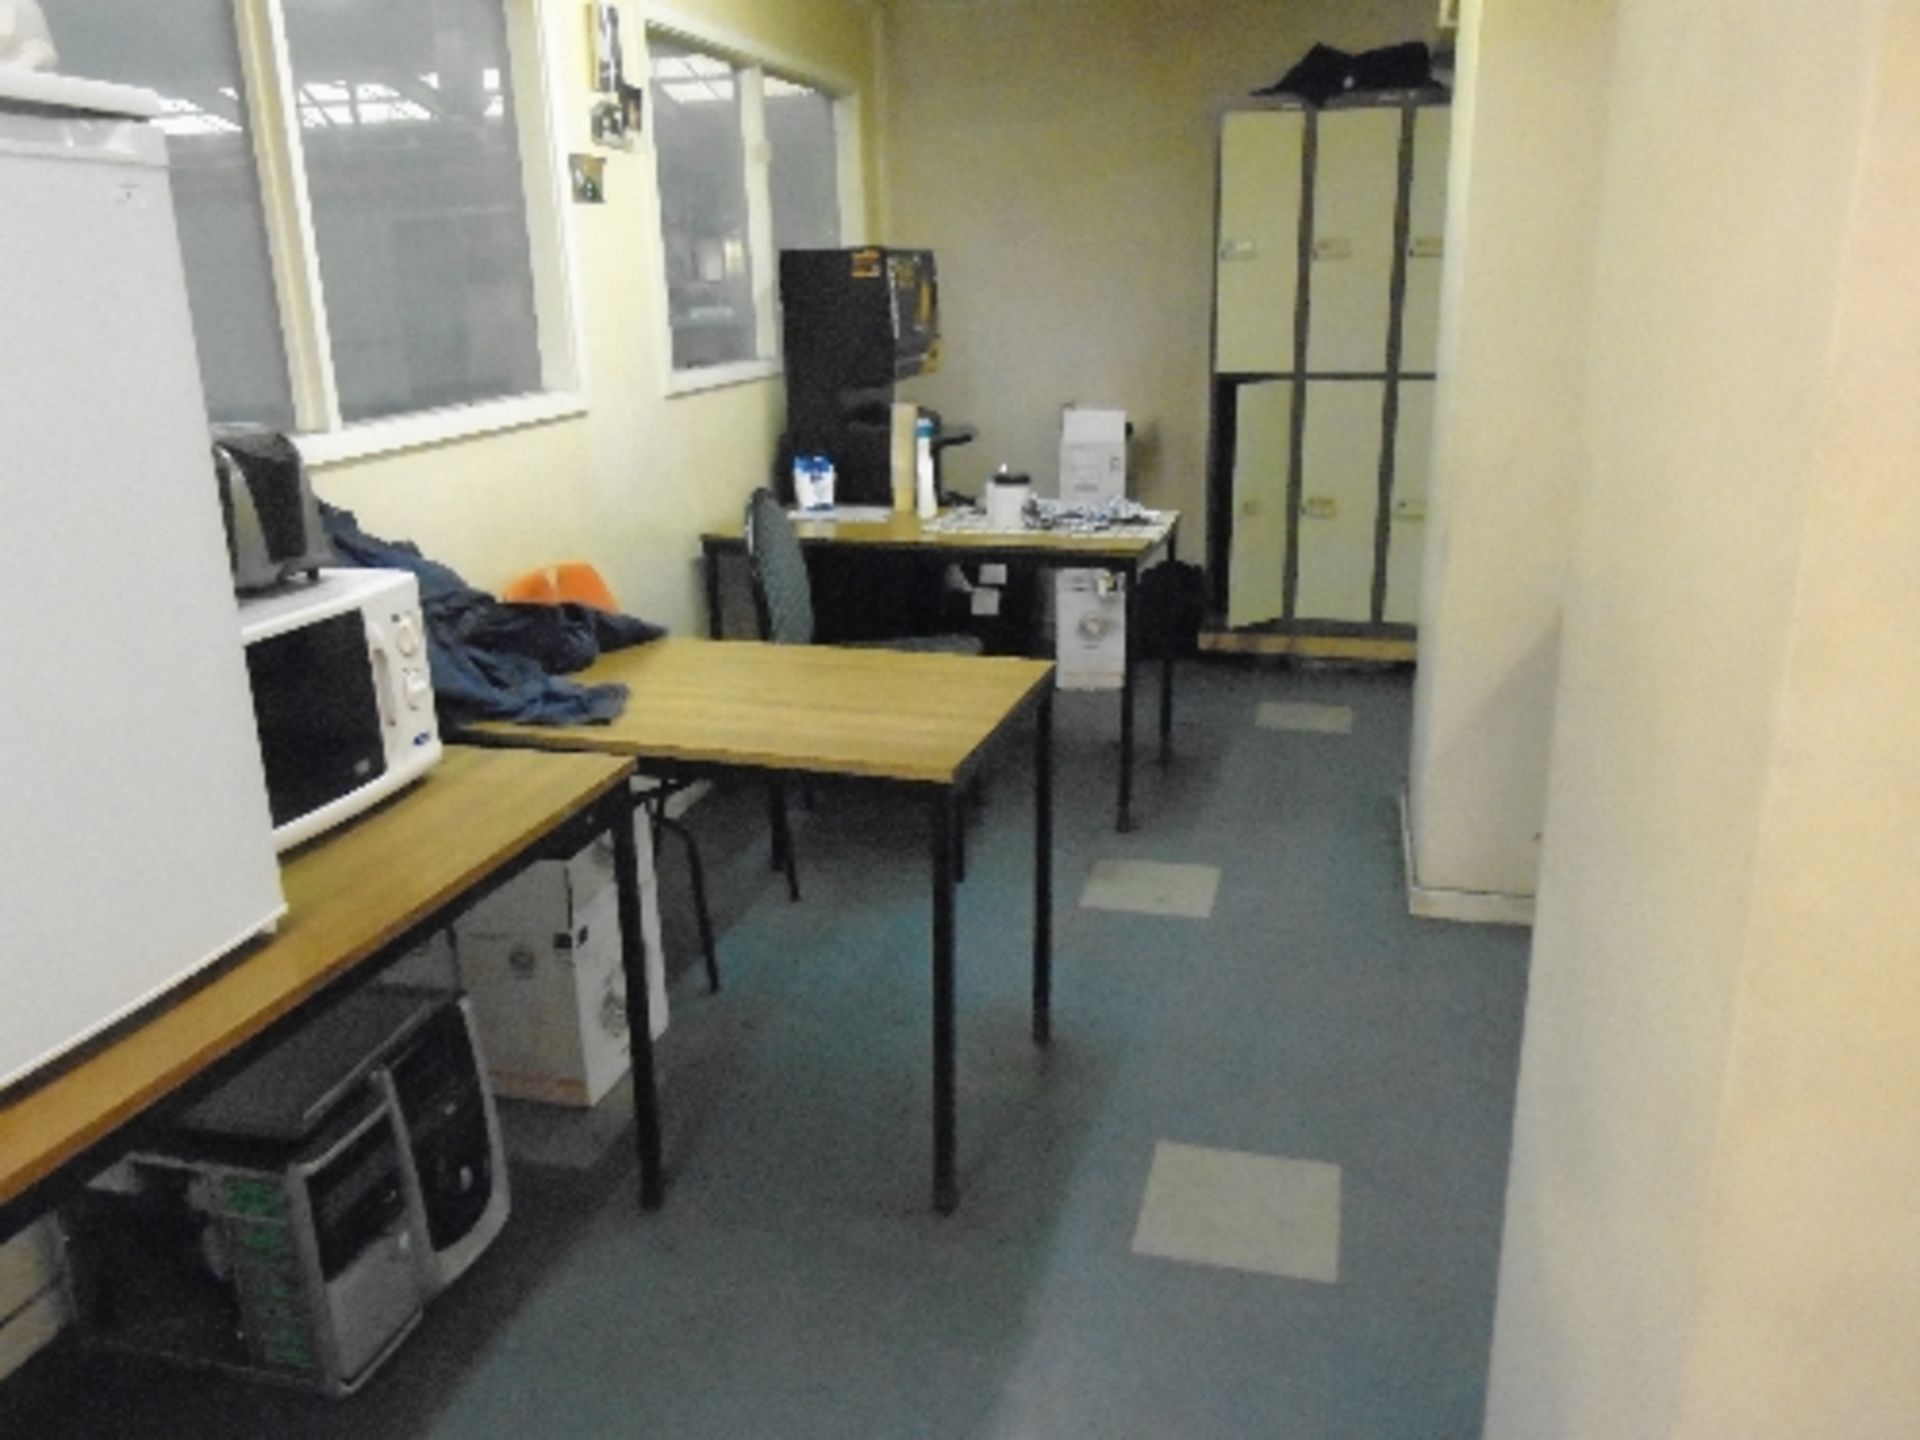 Remaining contents to canteen area - tables, chairs, vacuum cleaners, heaters, mugs, - Image 2 of 4